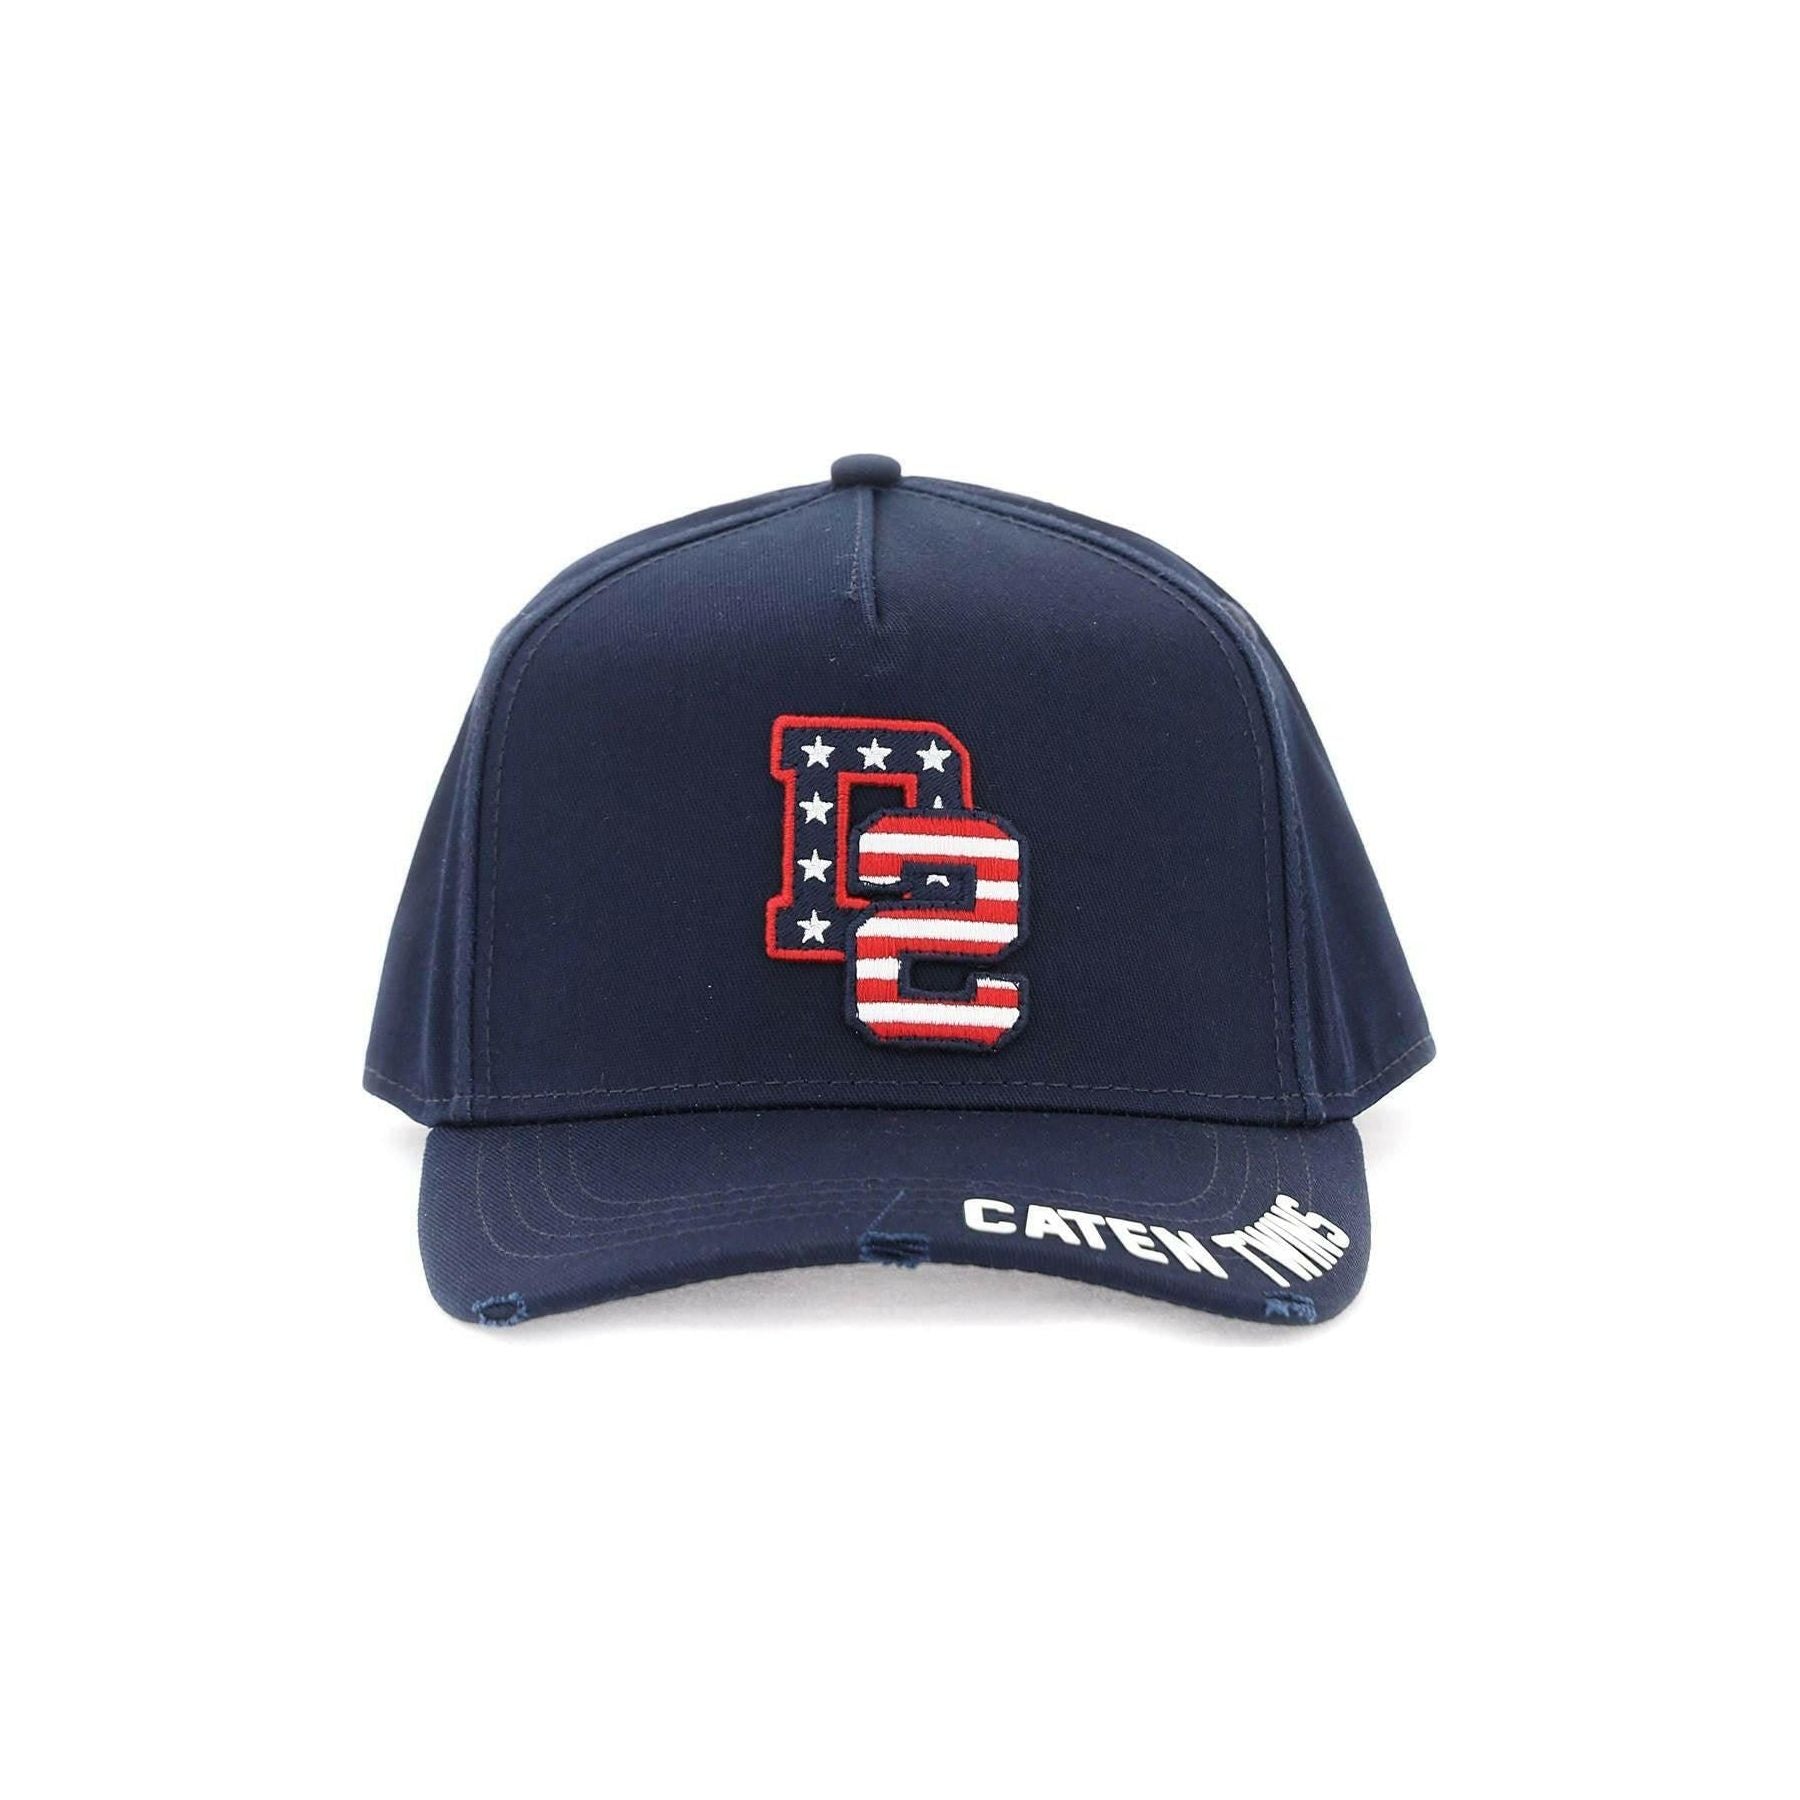 Navy Embroidered Patch Baseball Cap DSQUARED2 JOHN JULIA.